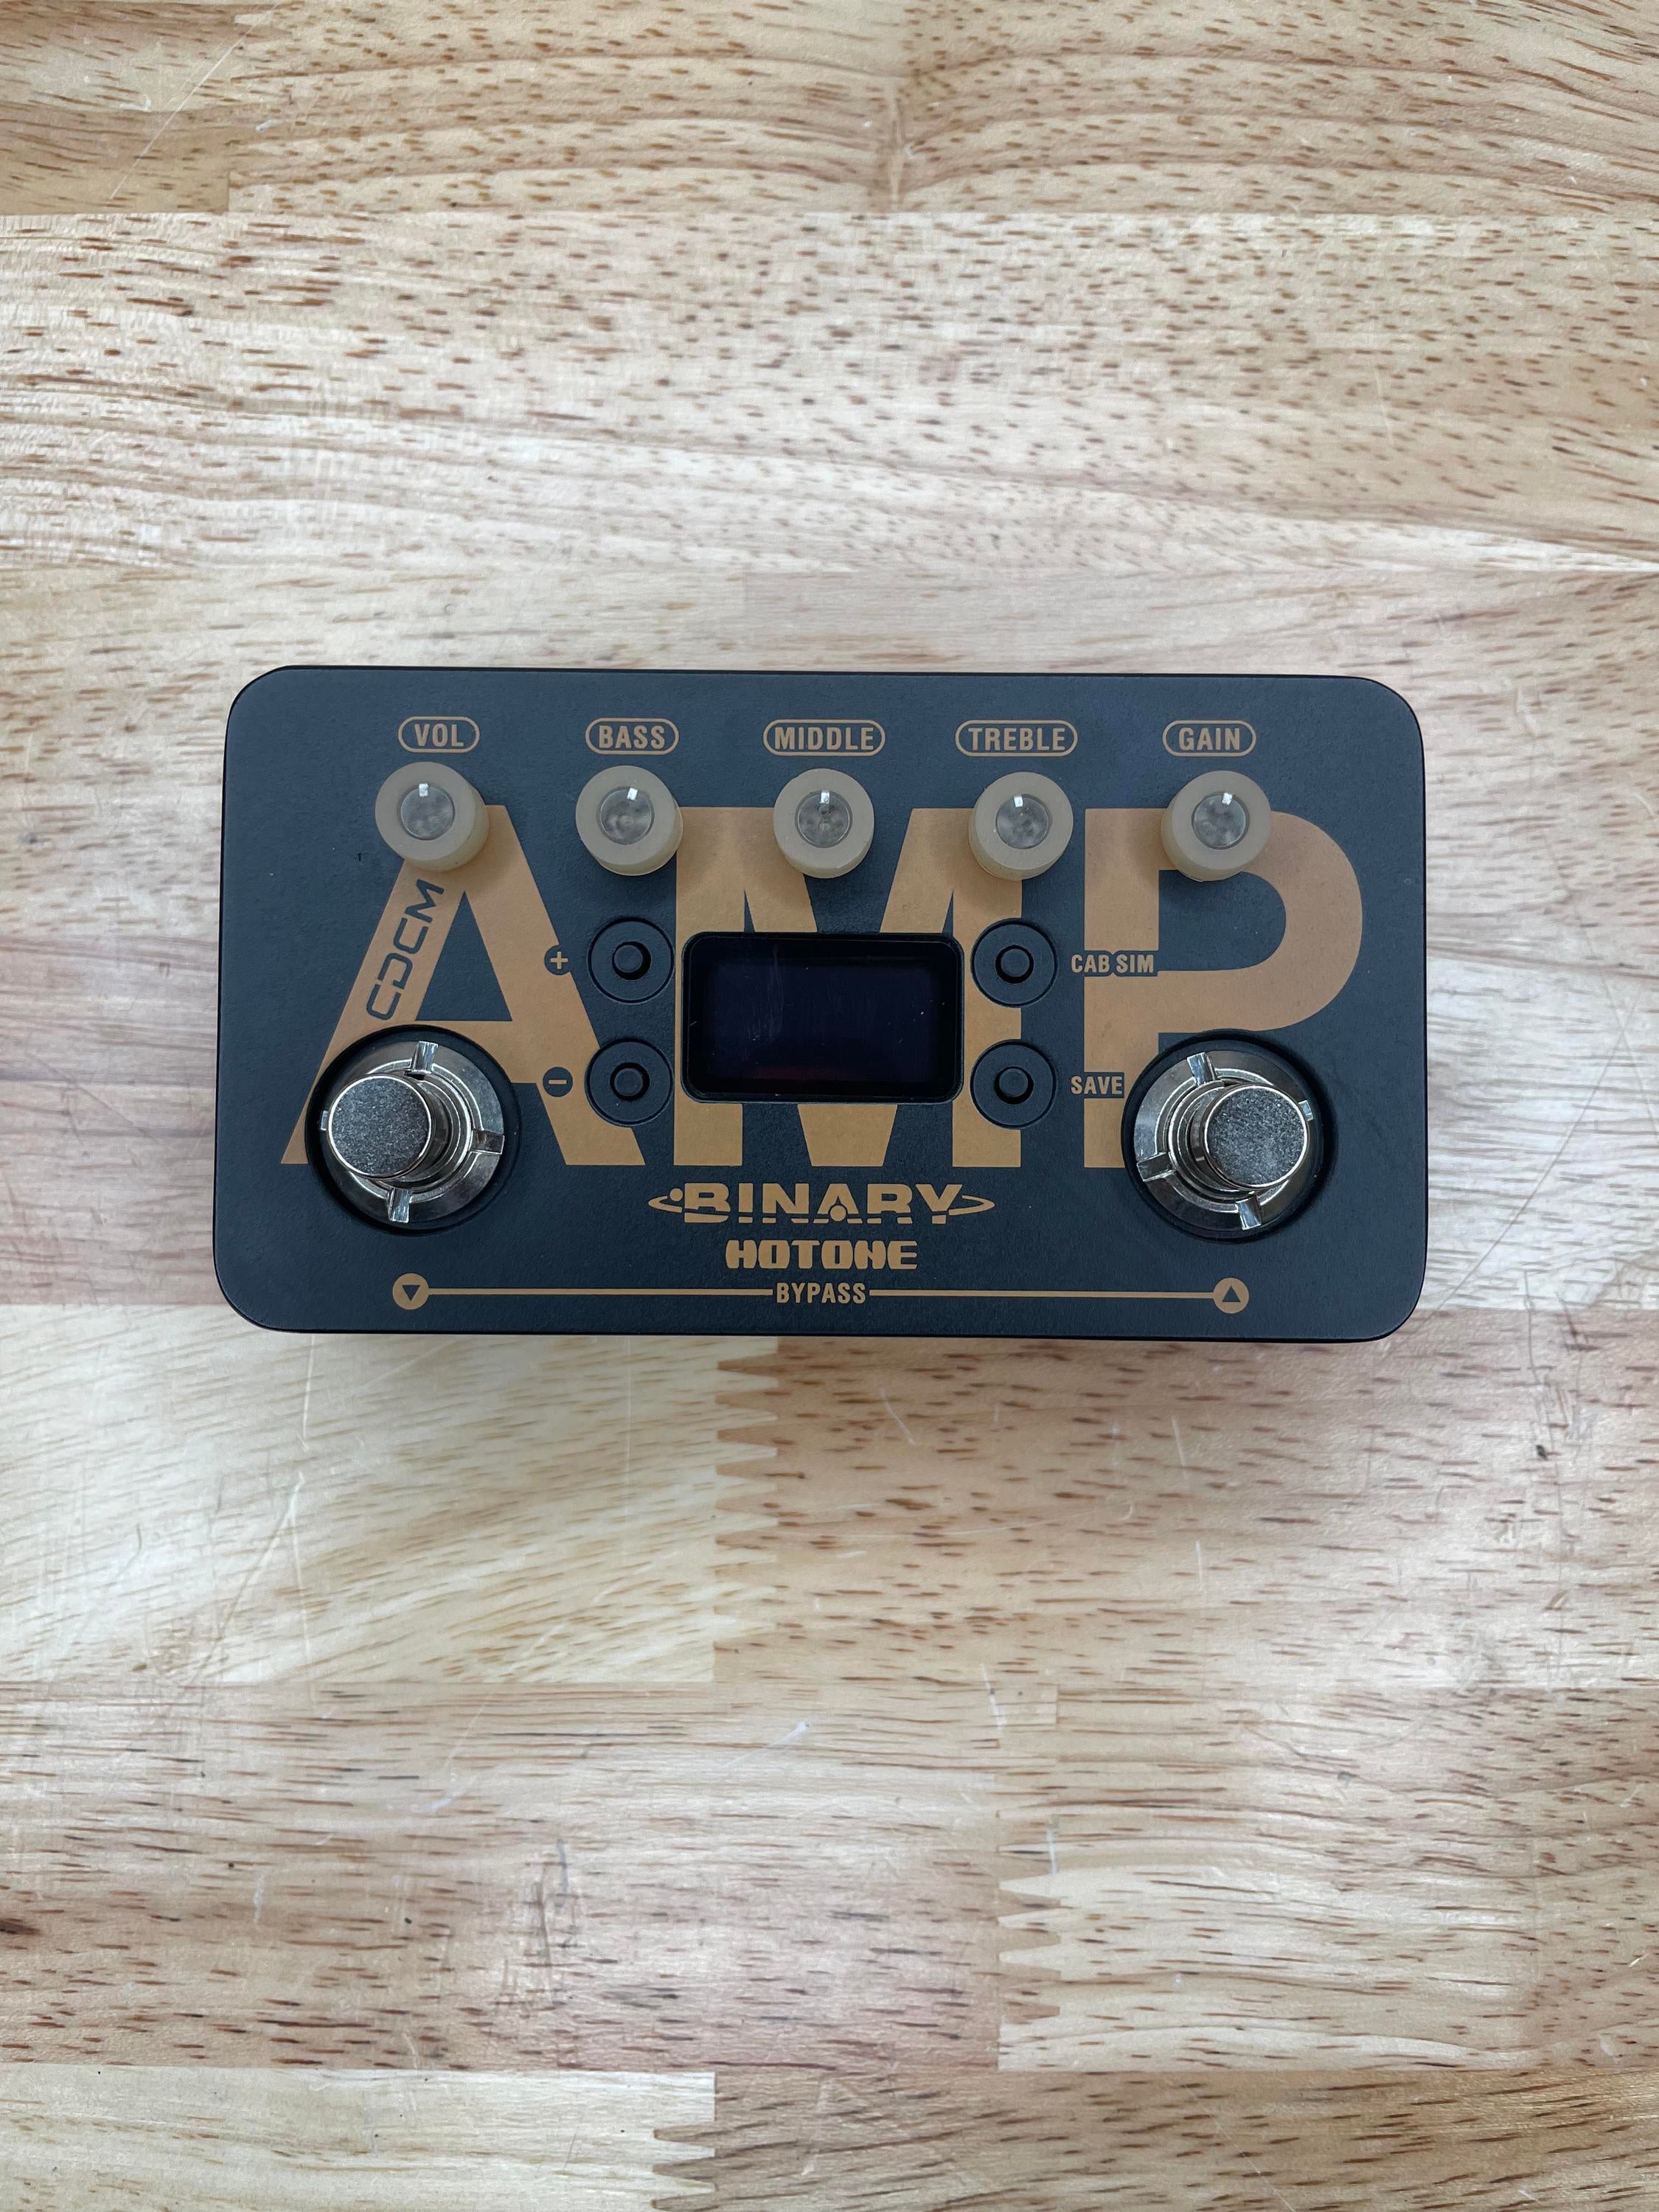 Used Hotone BAP-1 Binary AMP - Sweetwater's Gear Exchange